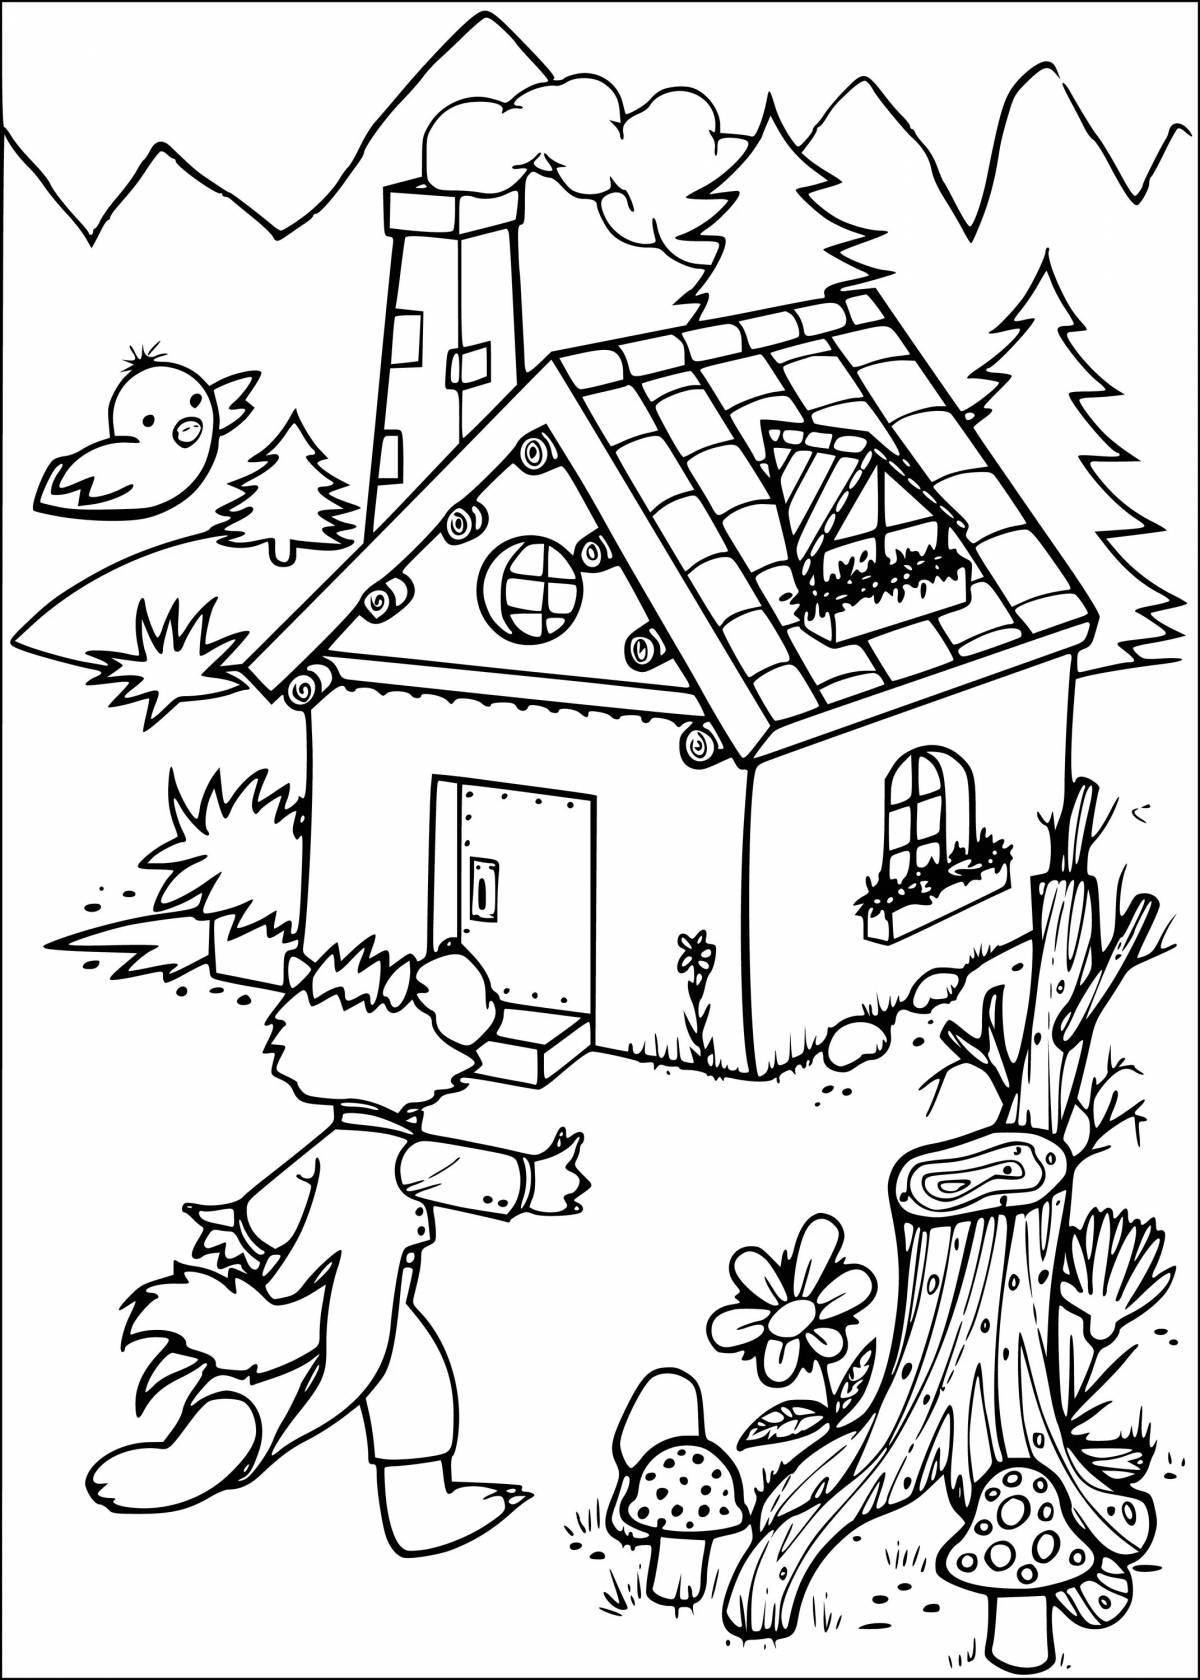 Colored three little pigs with houses